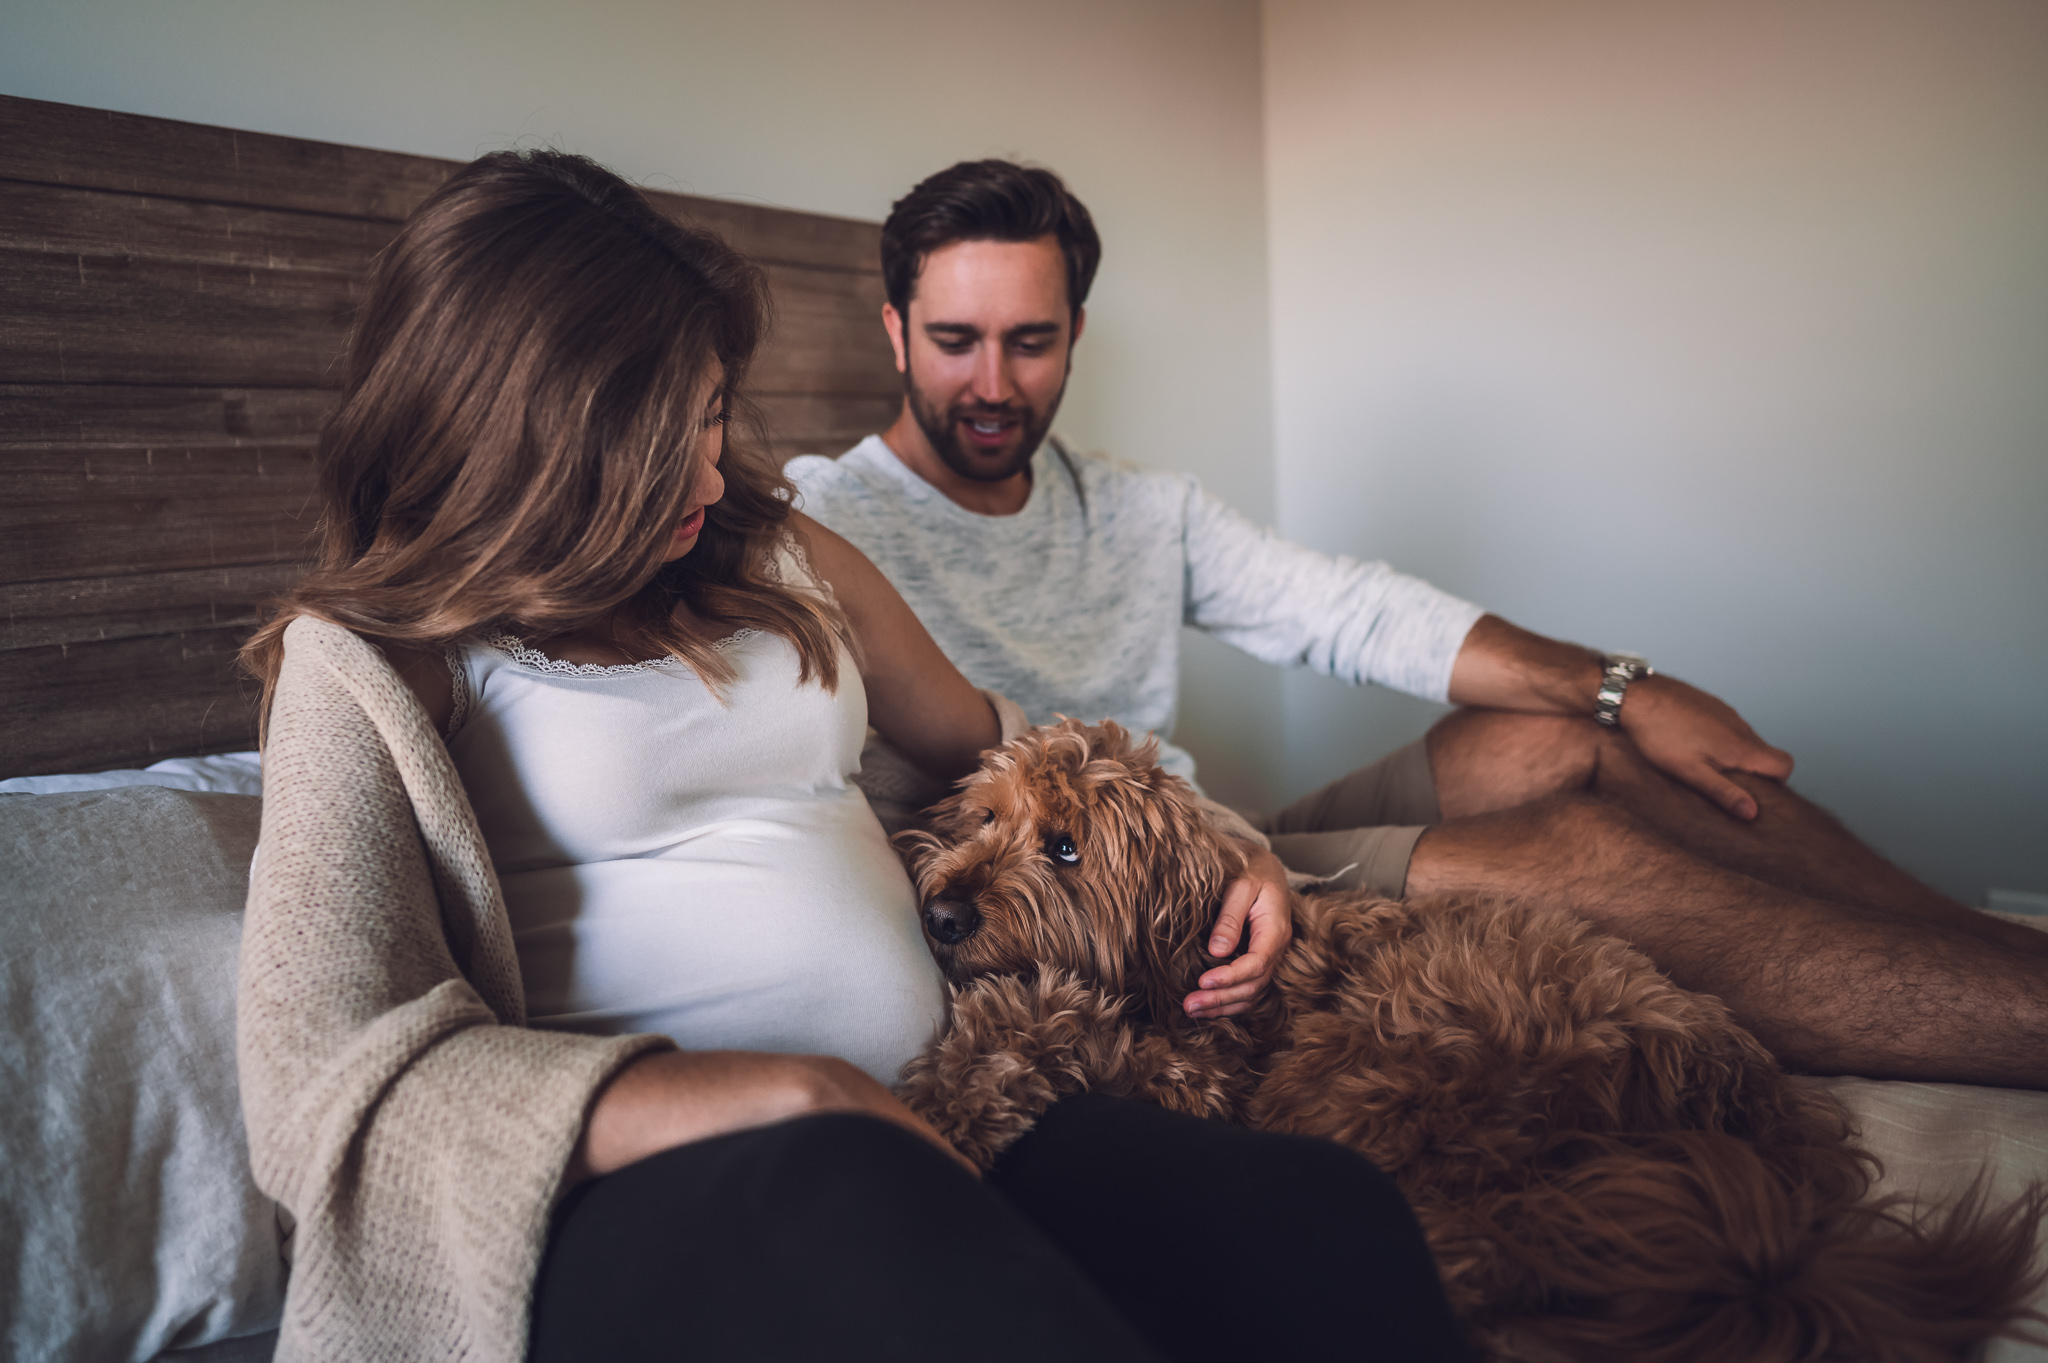 Maternity photo session on a bed with a dog